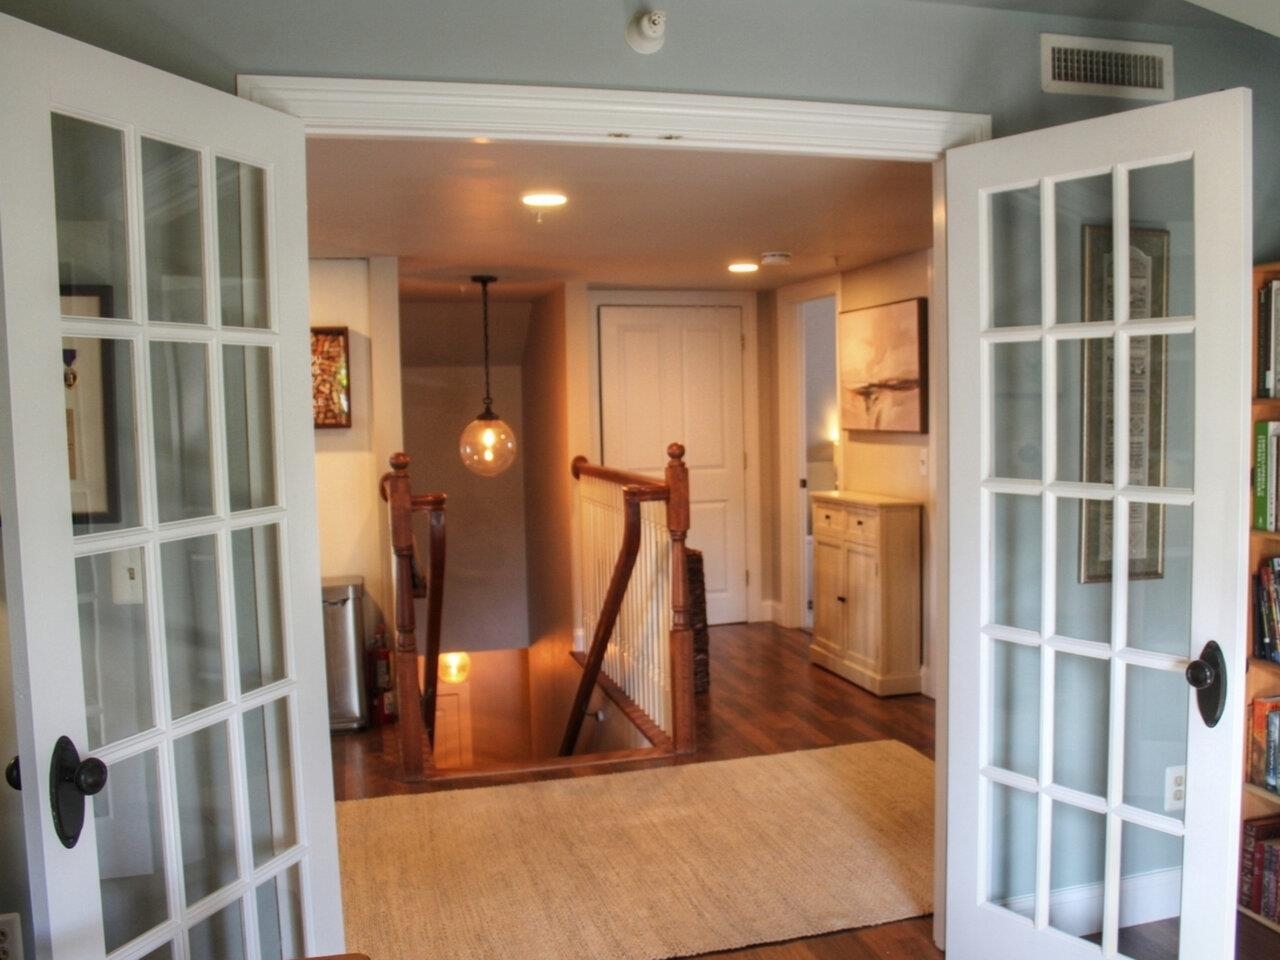 Open foyer at top of stairs